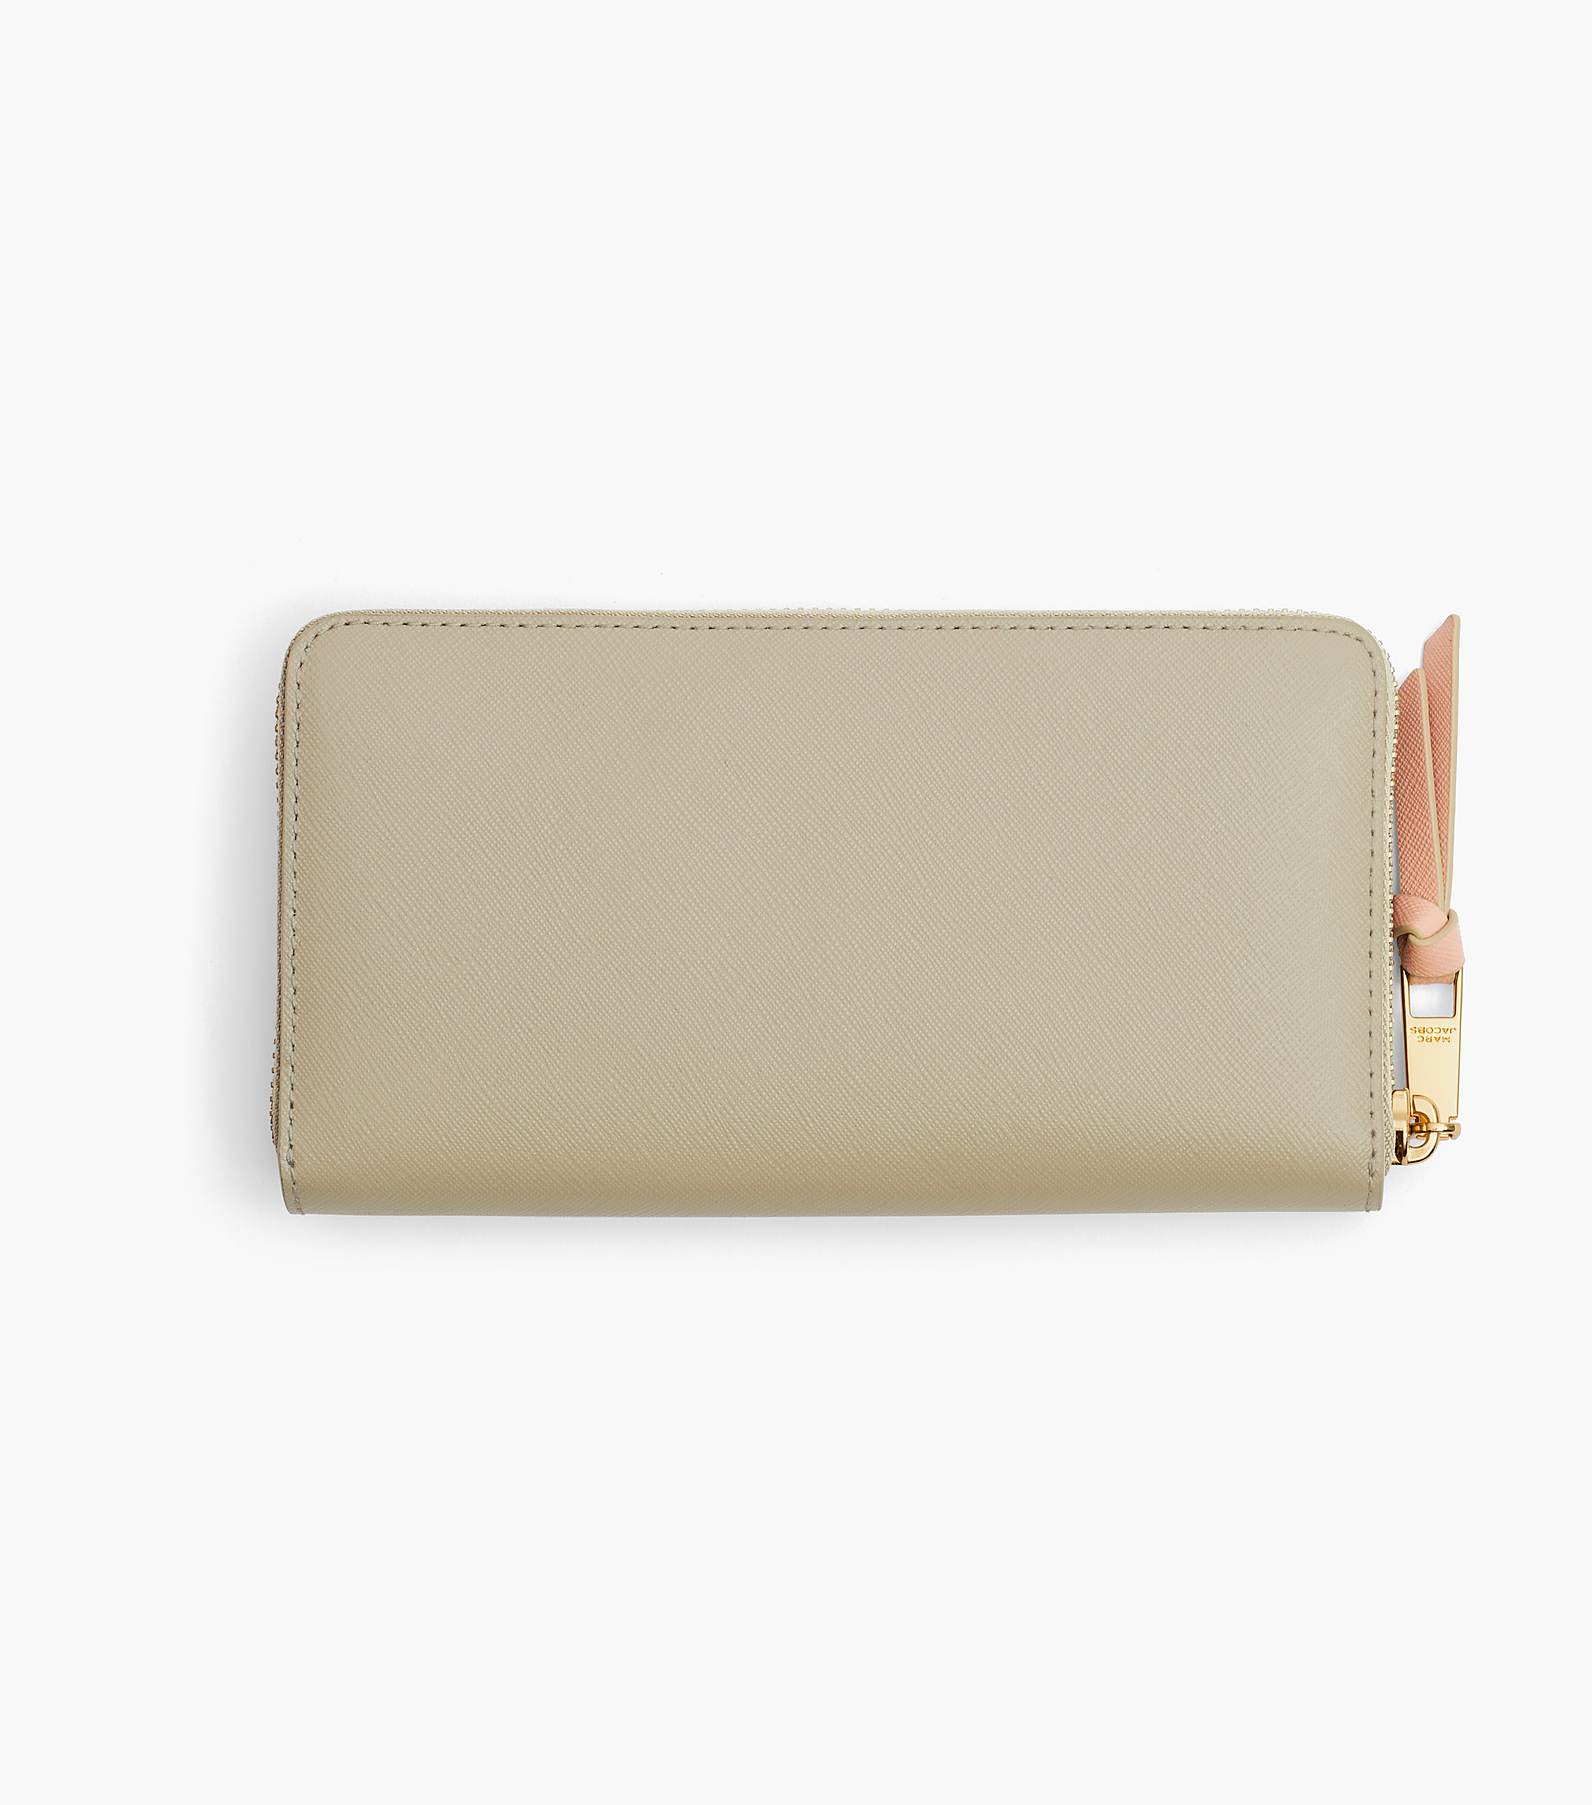 THE UTILITY SNAPSHOT CONTINENTAL WALLET | マーク ジェイコブス